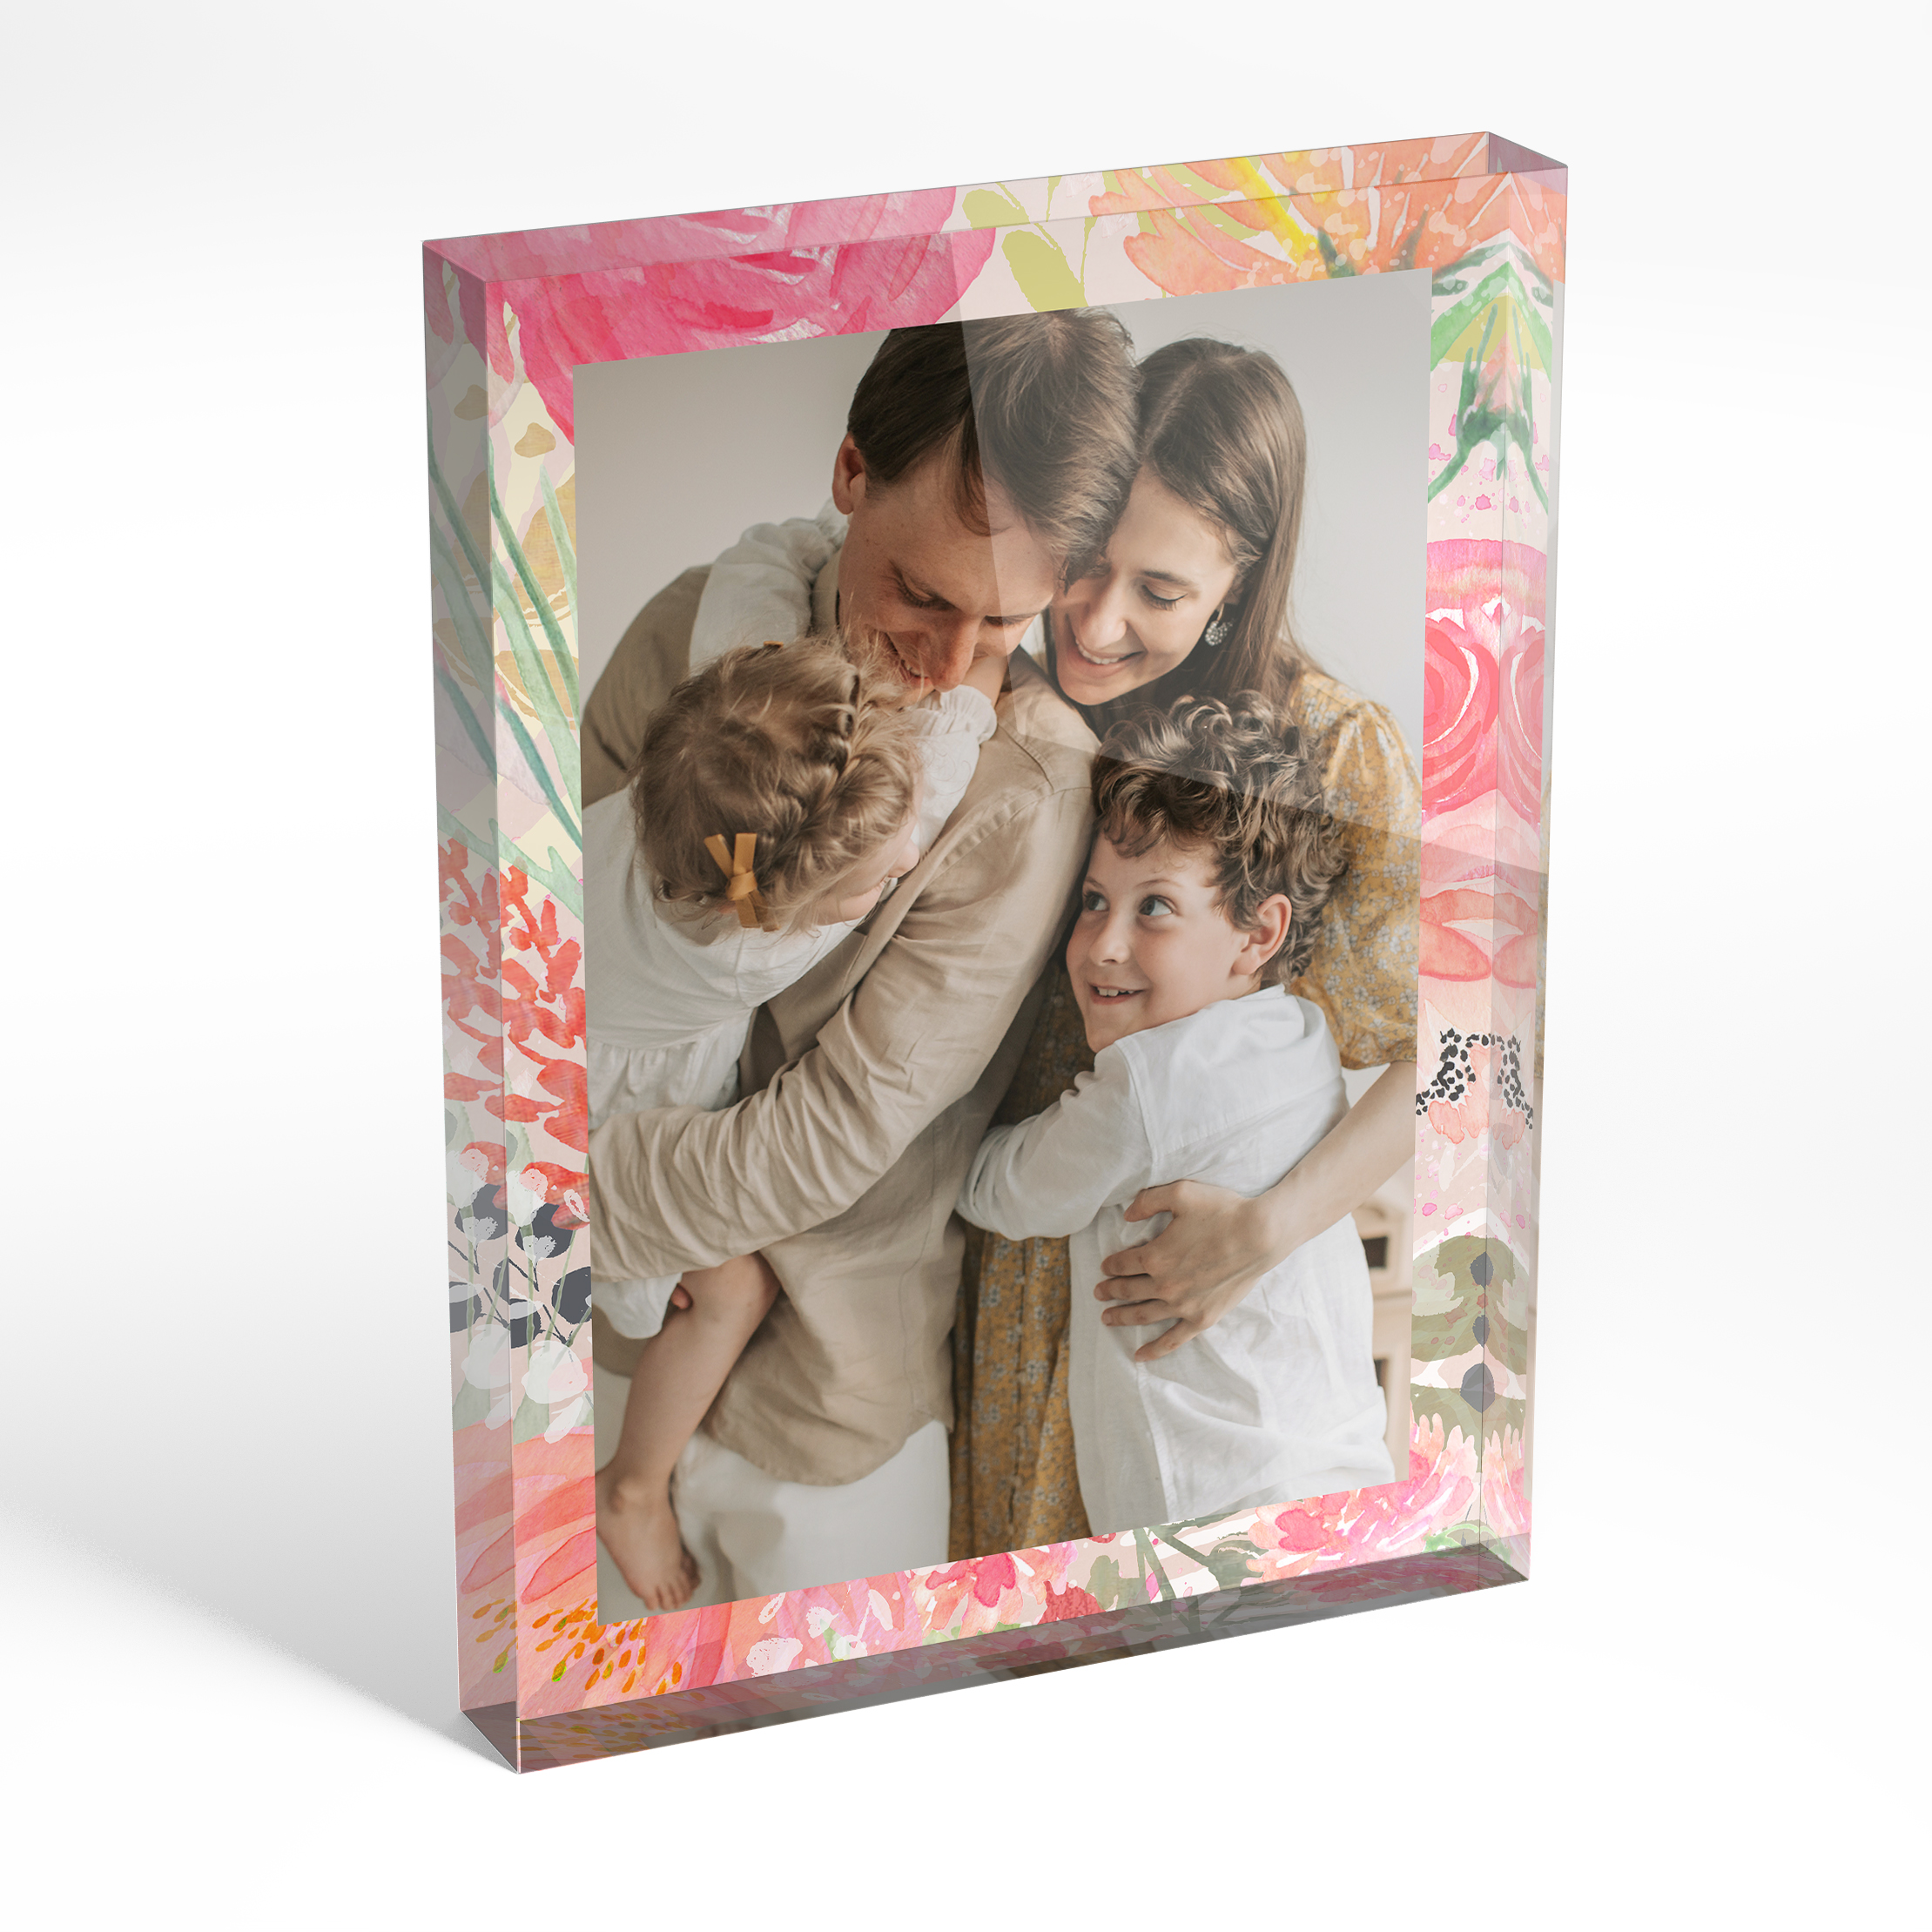 An angled side view of a portrait layout Acrylic Photo Block with space for 1 photo. Thiis design is named "Floral Zing". 